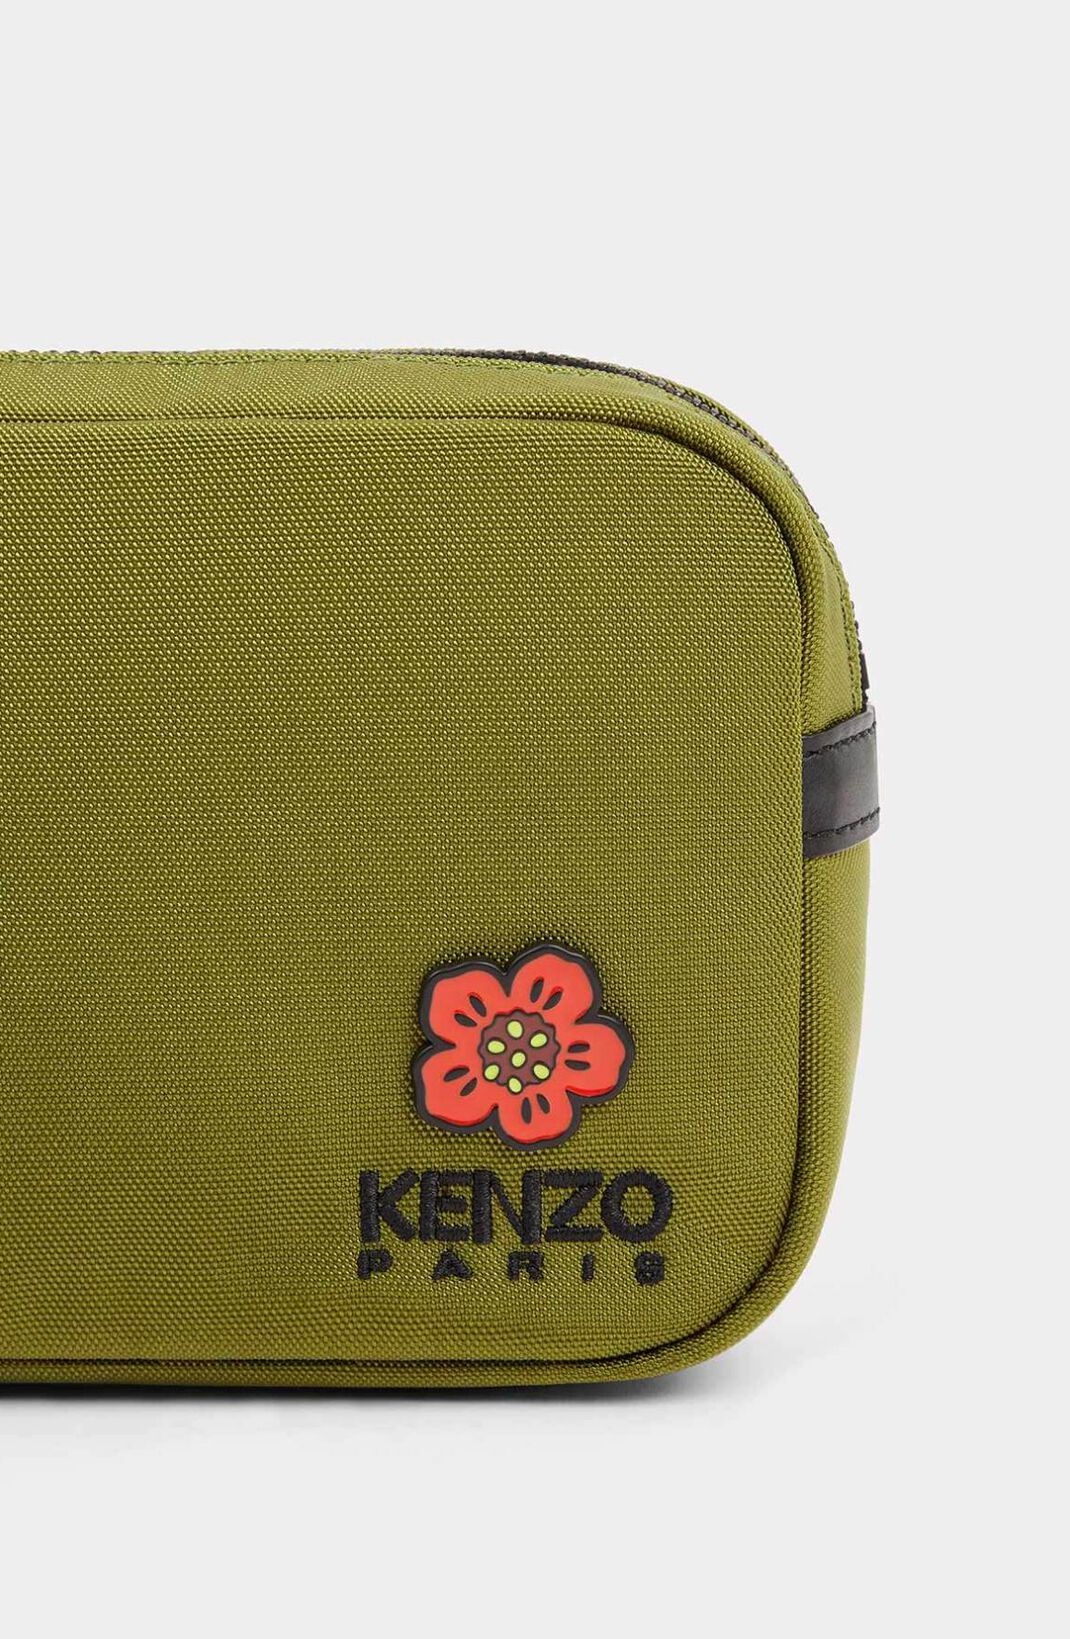 KENZO Crest bag with strap - 3